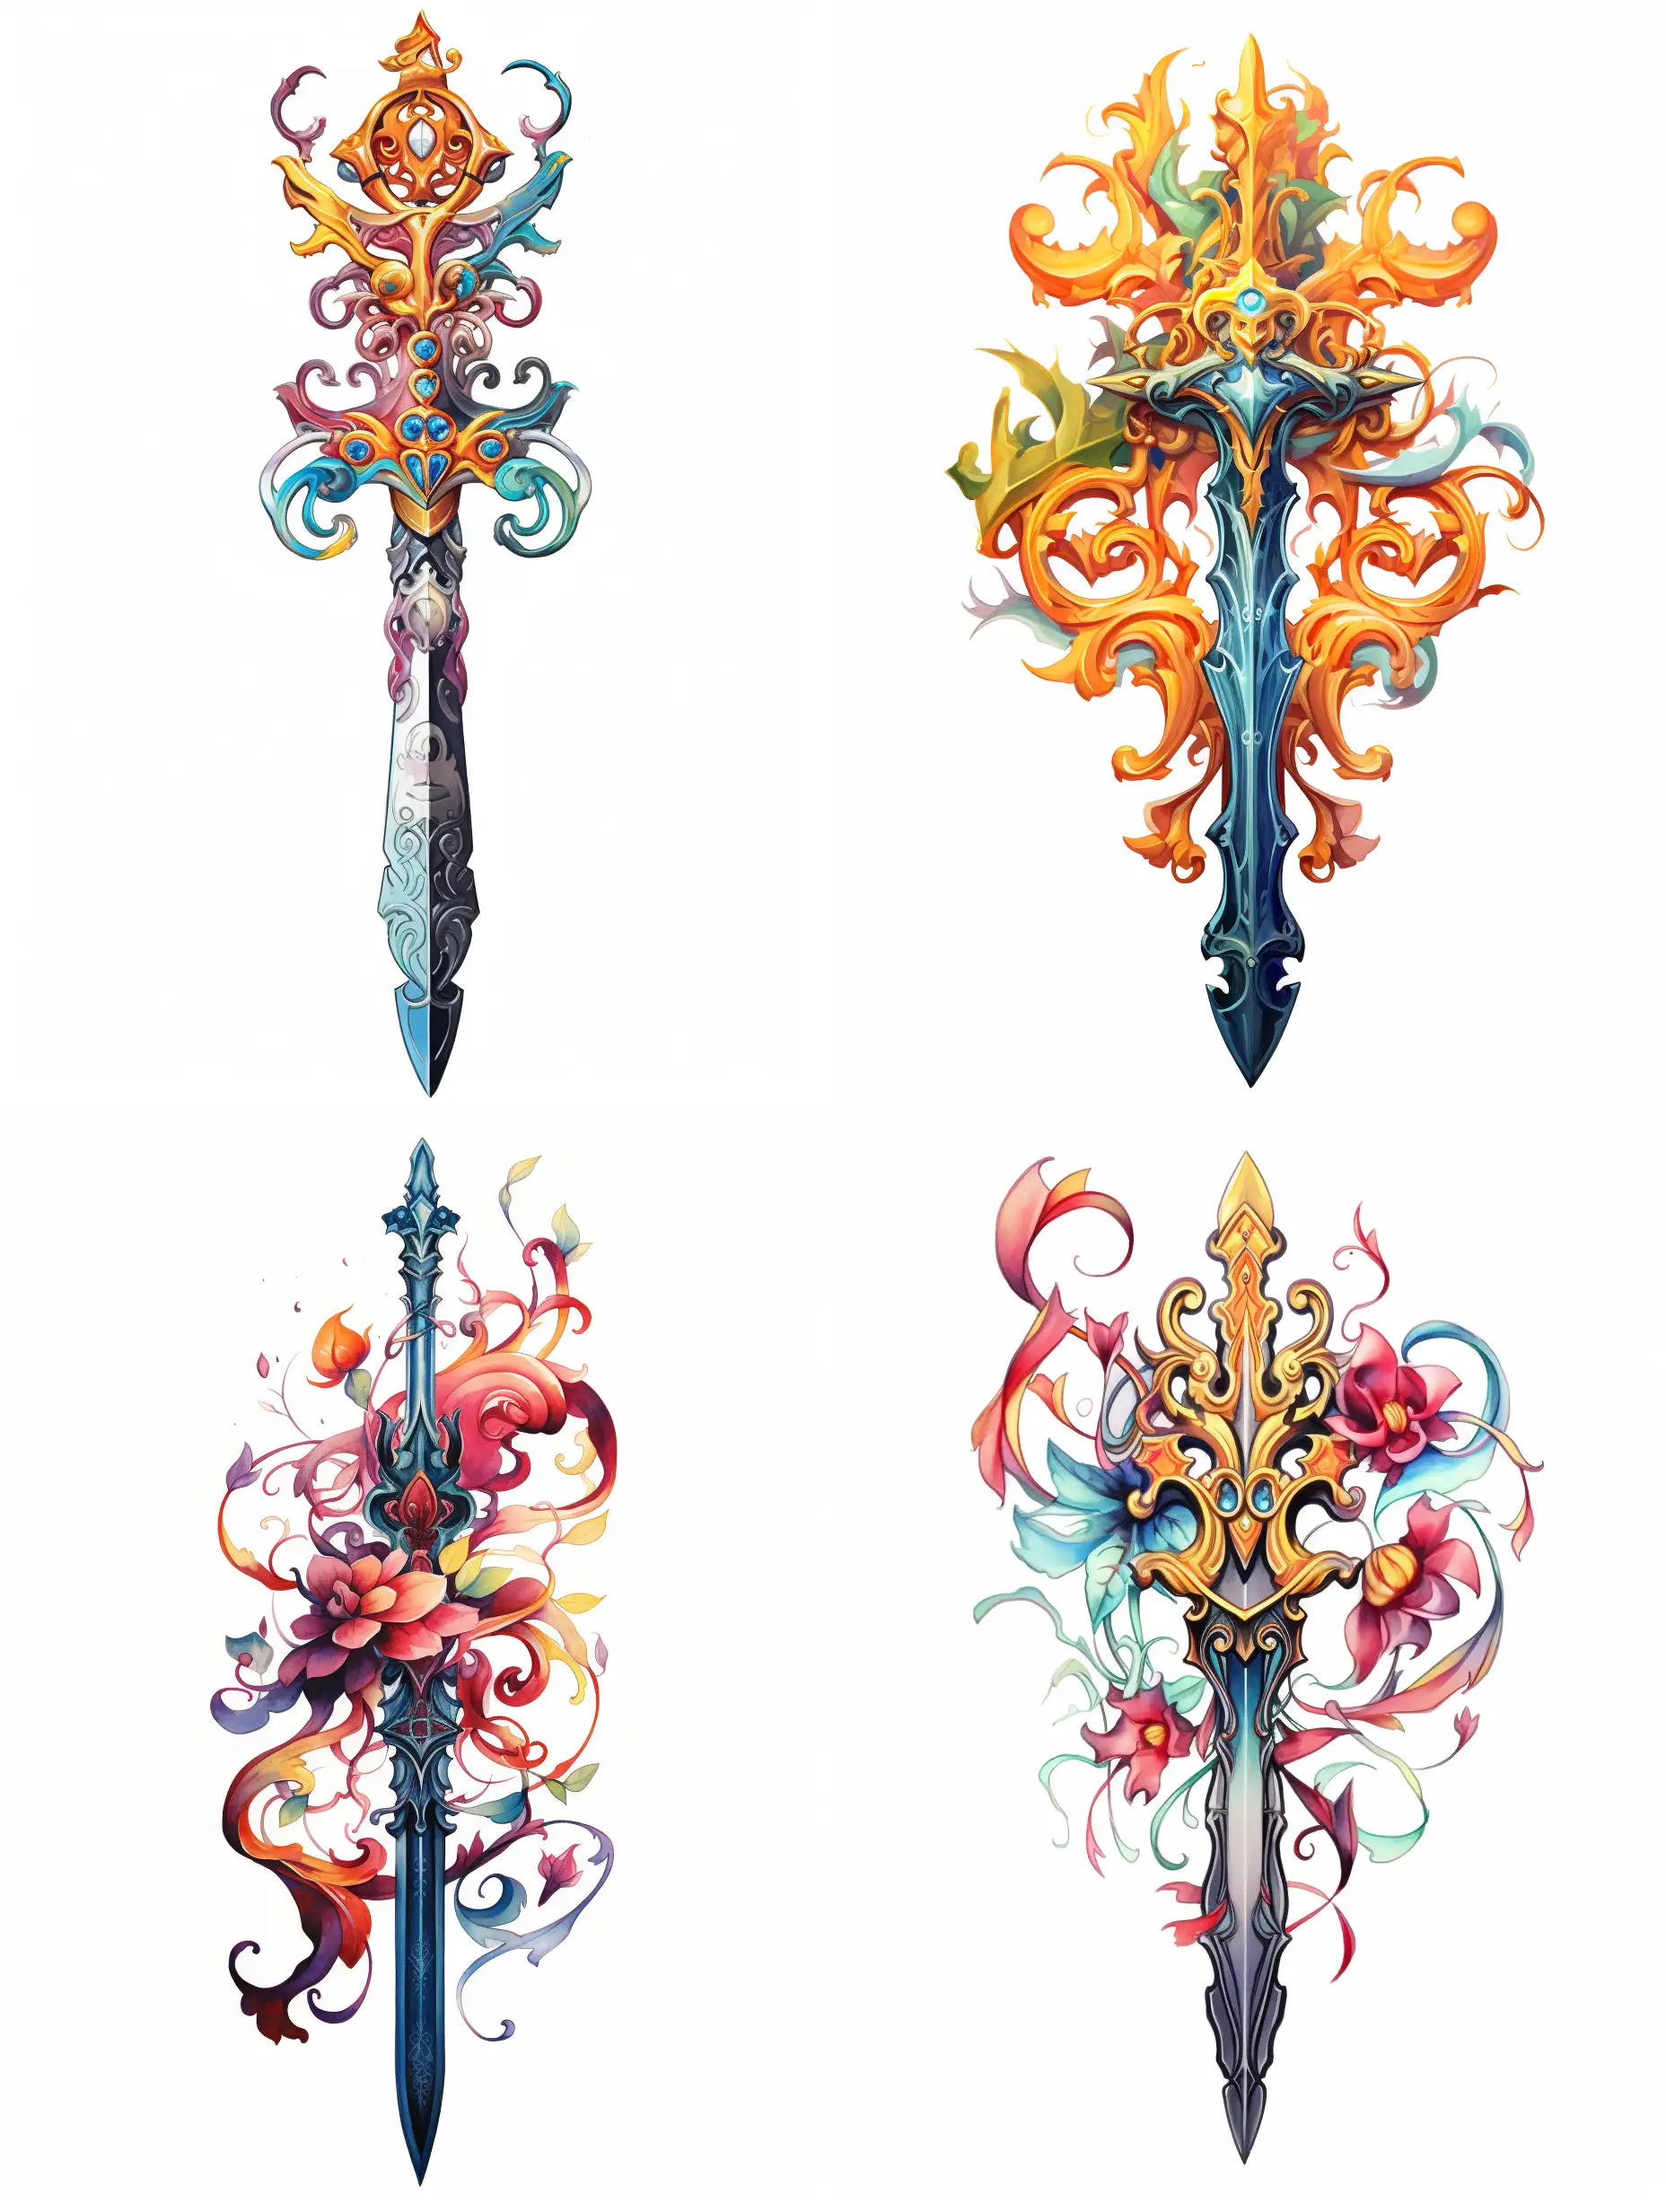 Exquisite-Stylized-Ancient-Sword-Illustration-in-Vivid-Watercolor-and-Ink